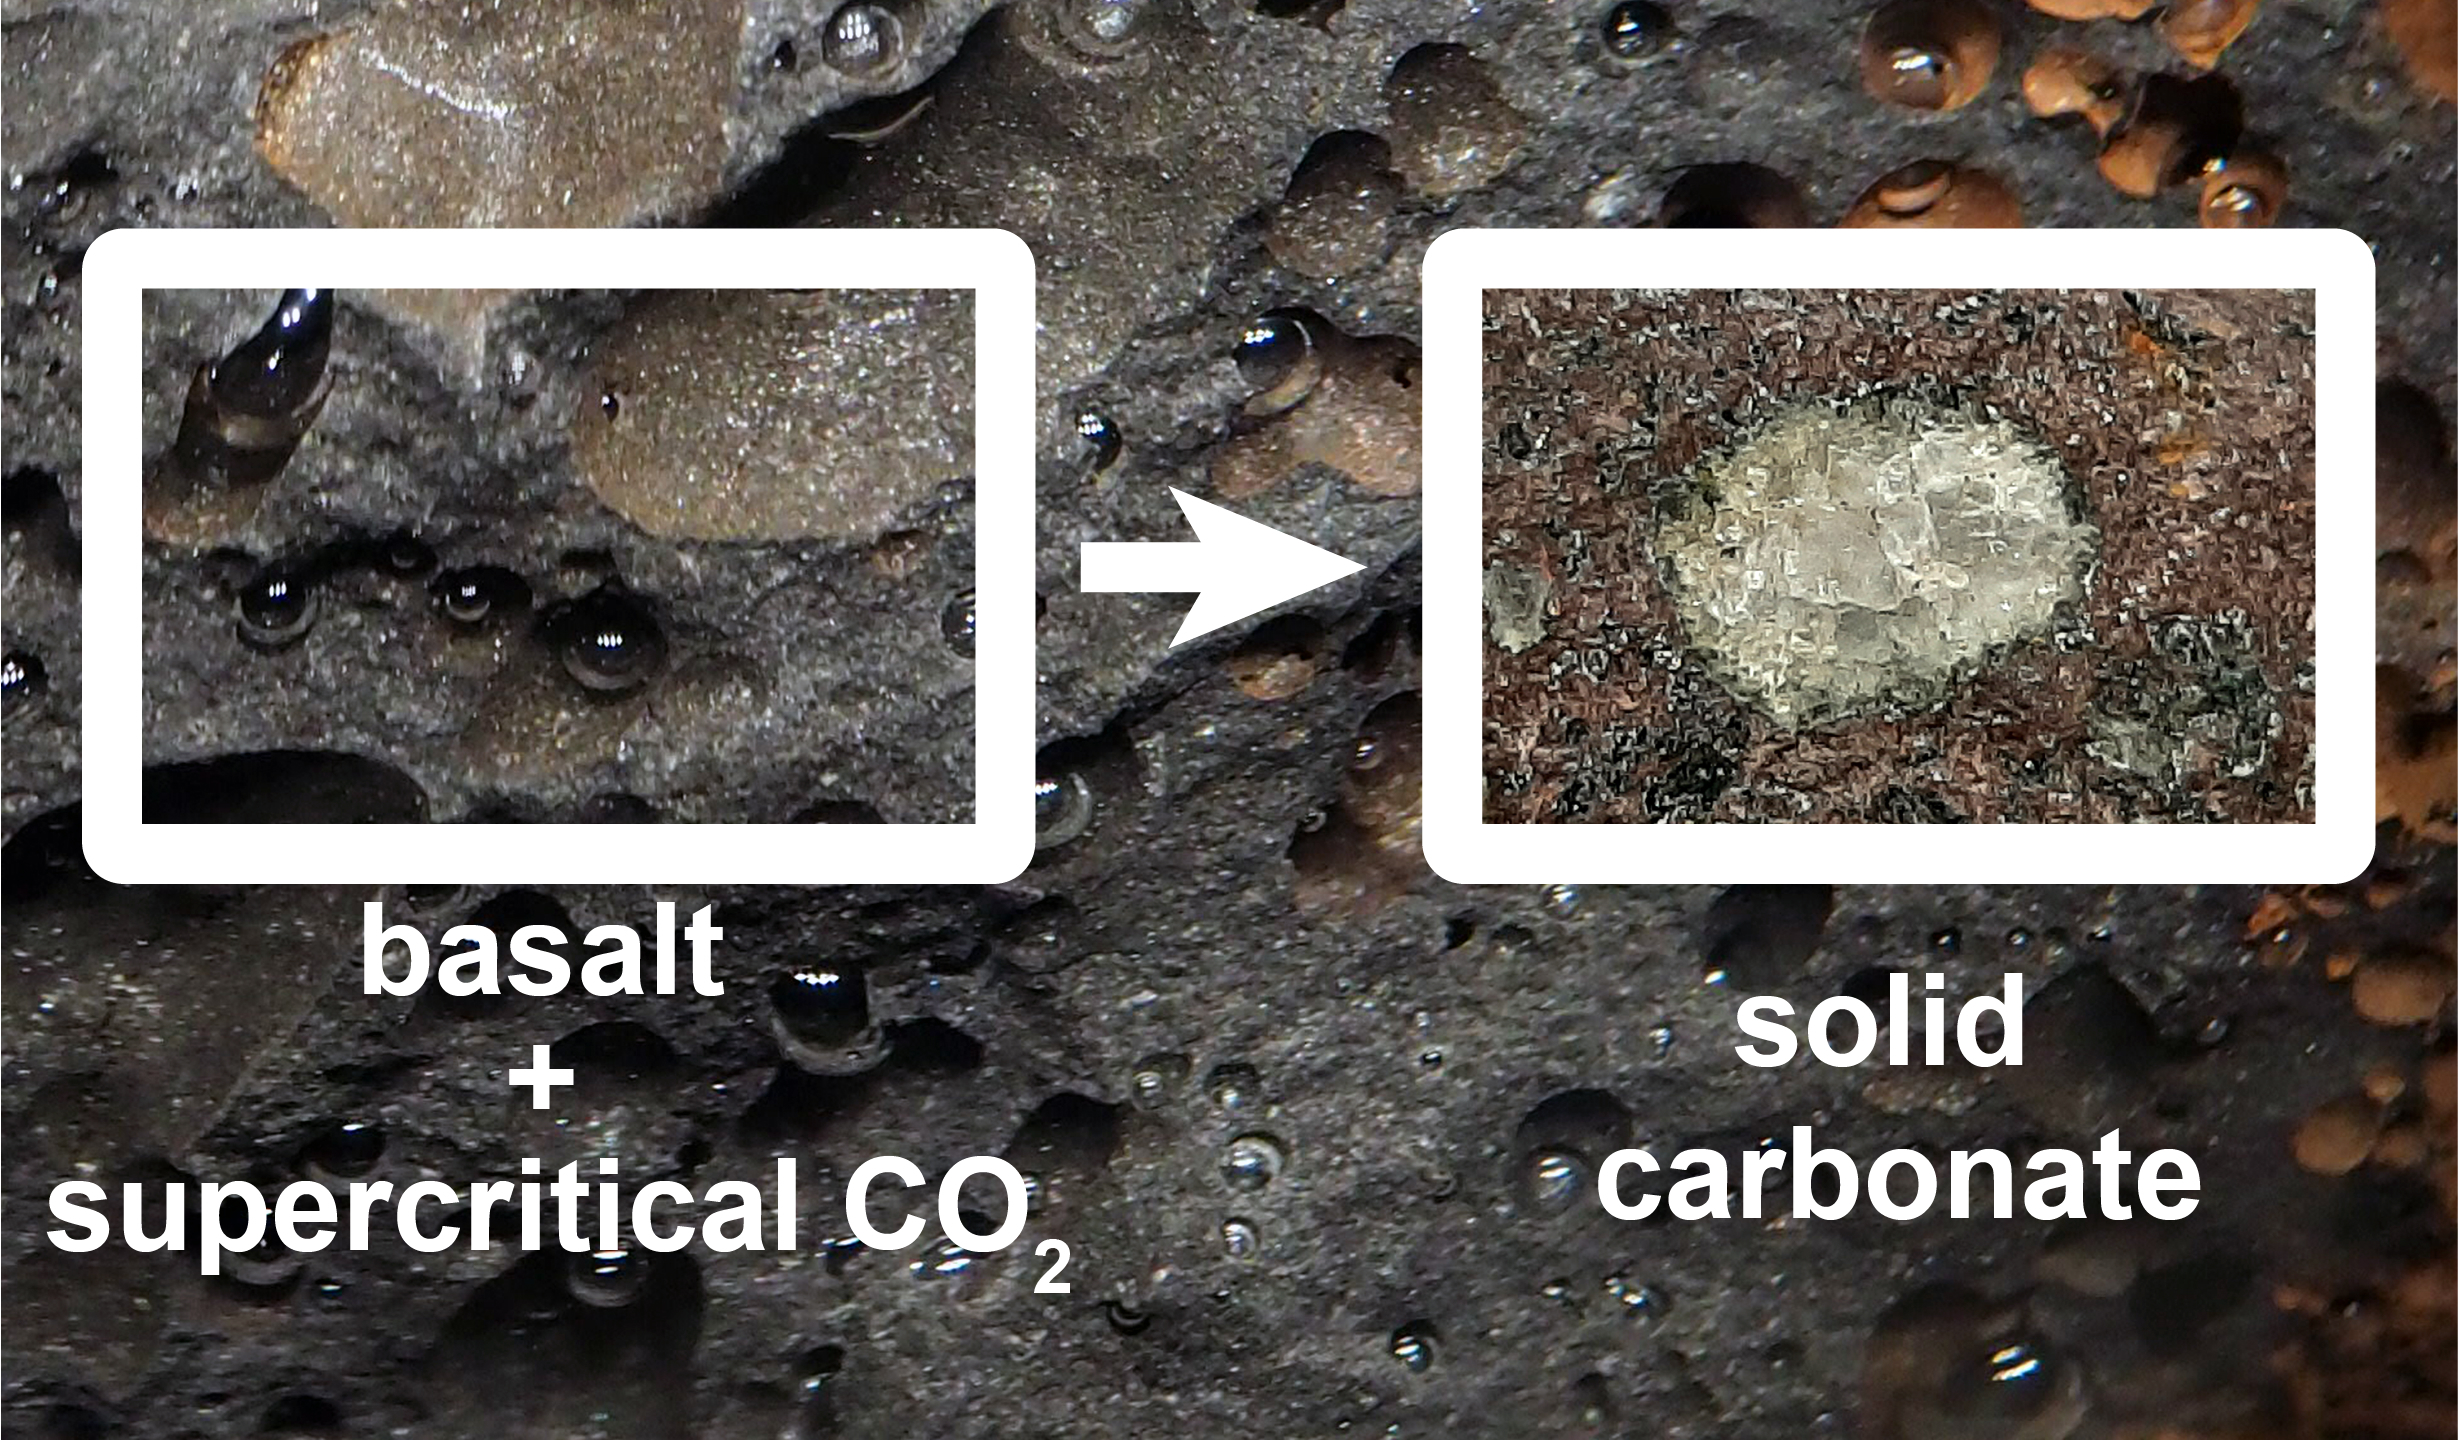 Solid Carbon Project confirms scale of feasibility of storing CO₂ in ocean basalt on a gigatron scale